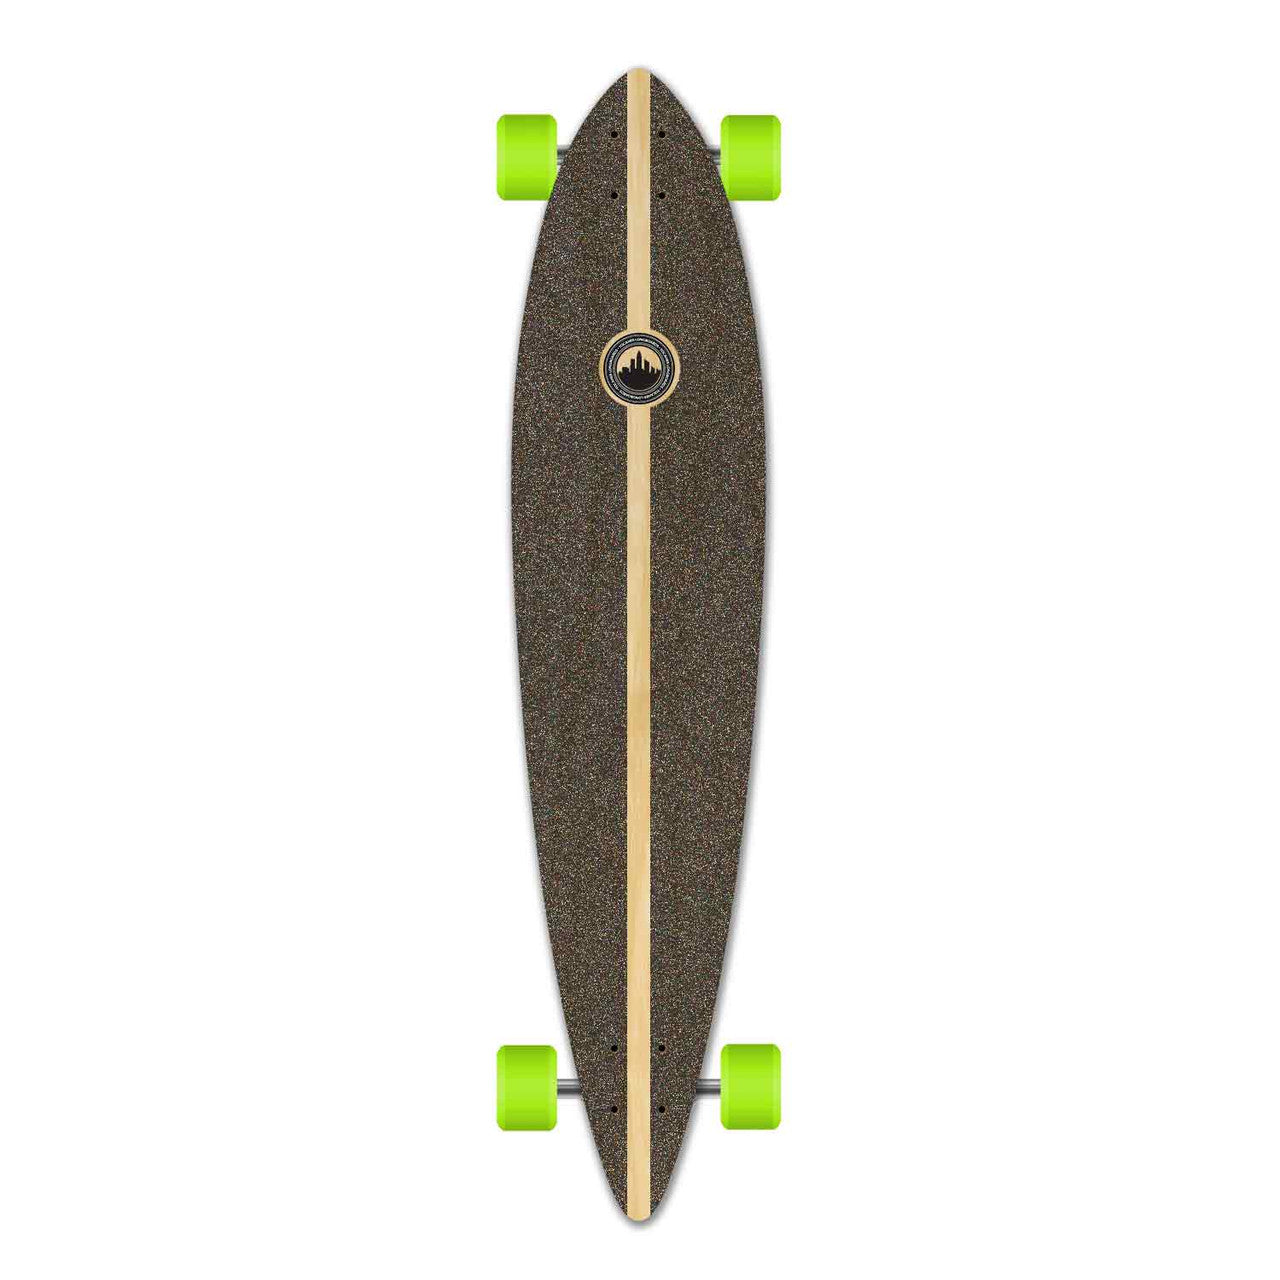 Yocaher Pintail Longboard Complete - Adventure Natural